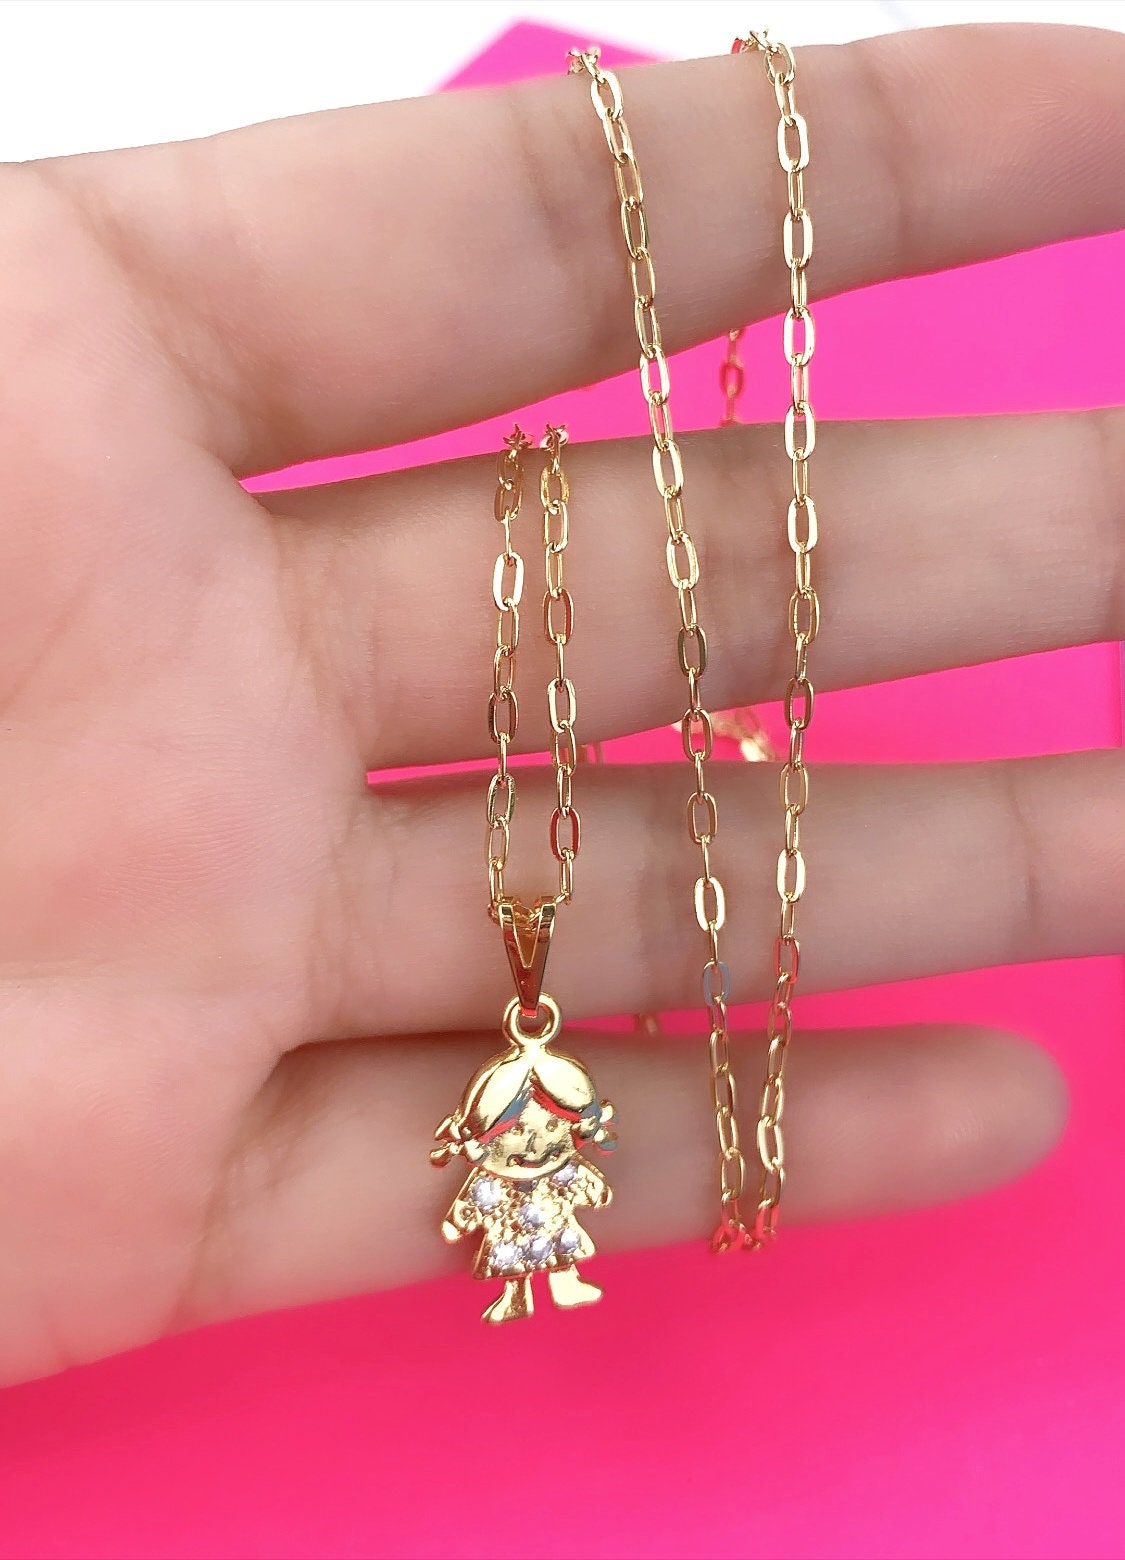 18K Gold Filled Boy or Girl Charms Pendant with Cubic Zirconia, Moving Head, for Wholesale and Jewelry Supplies, Family Jewelry for Mother Boy